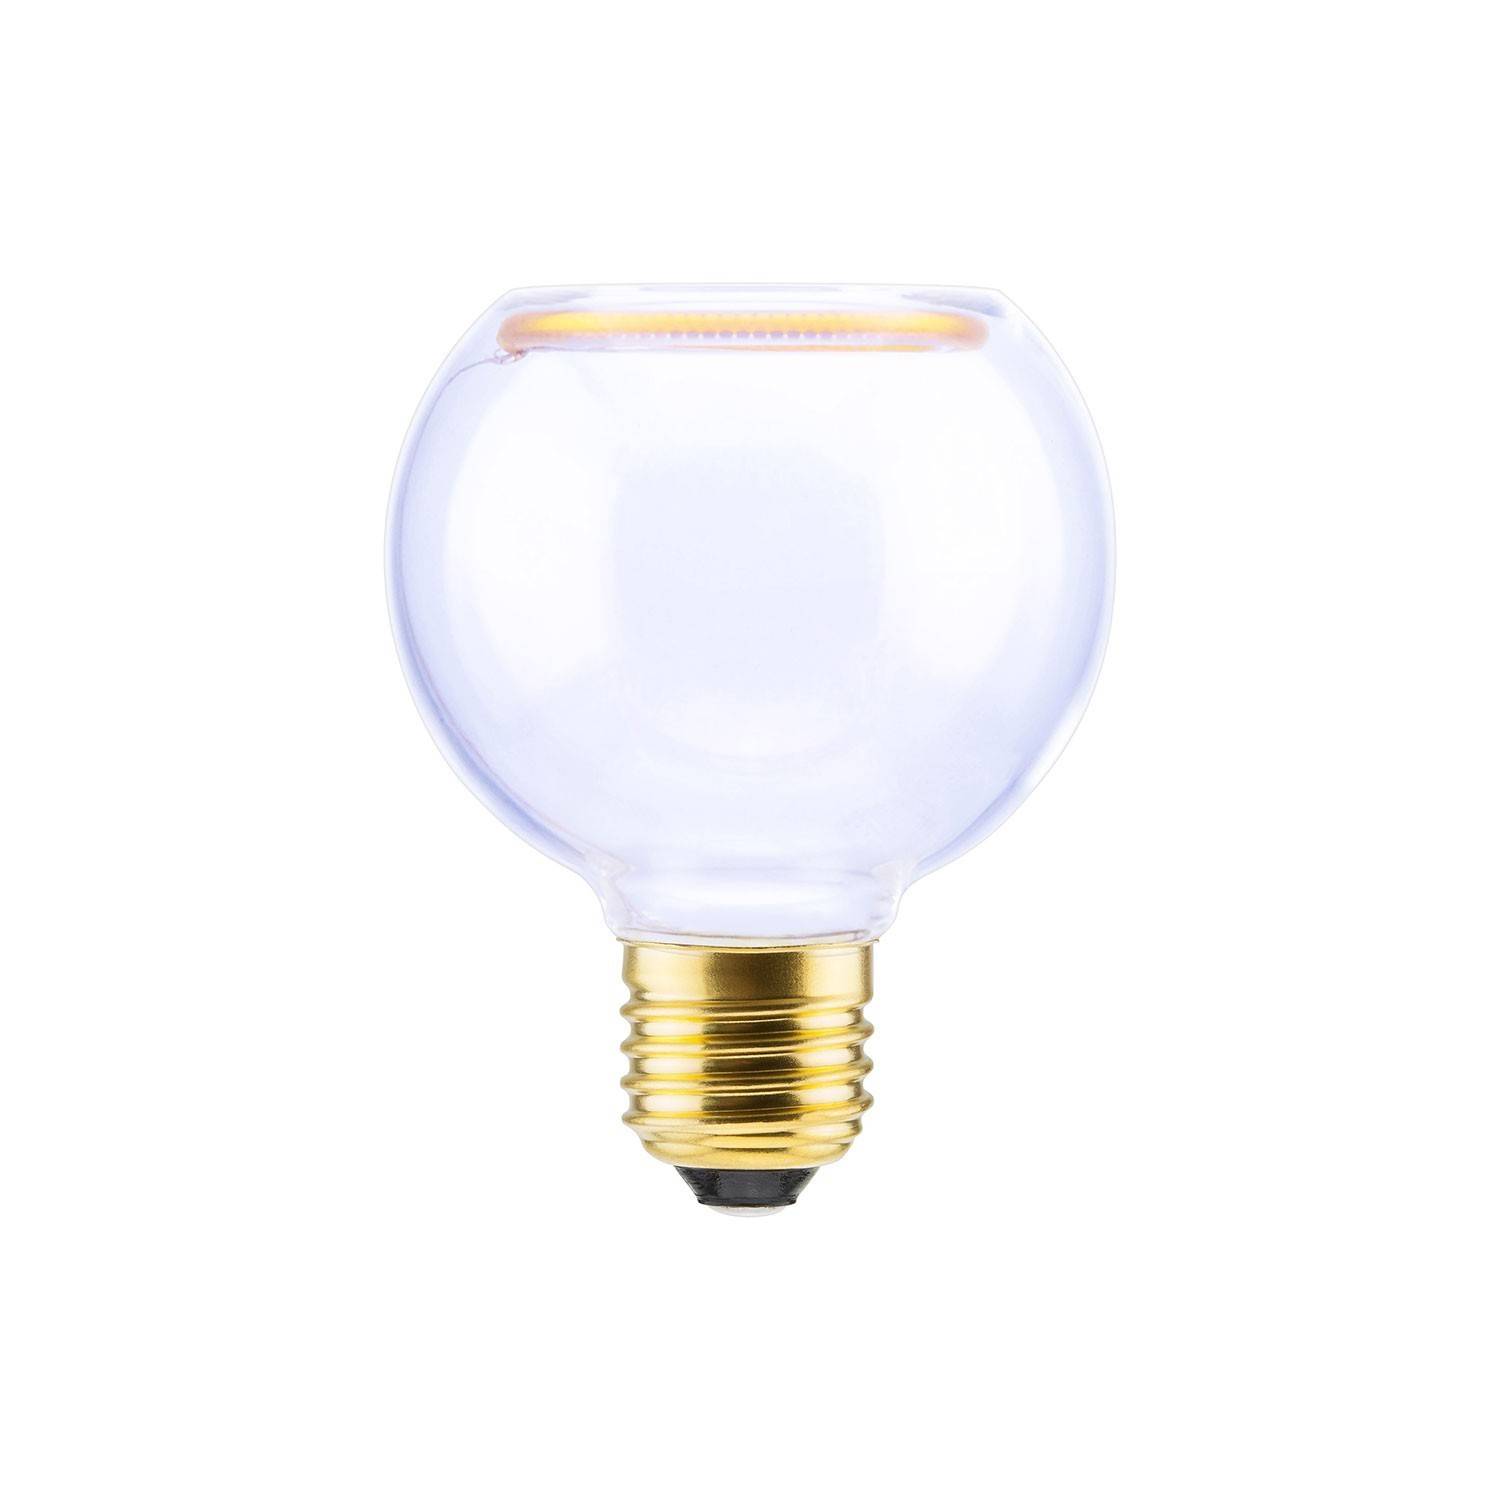 LED Globe G80 Clear Light Bulb Floating Collection 4W 240Lm 2200K Dimmable